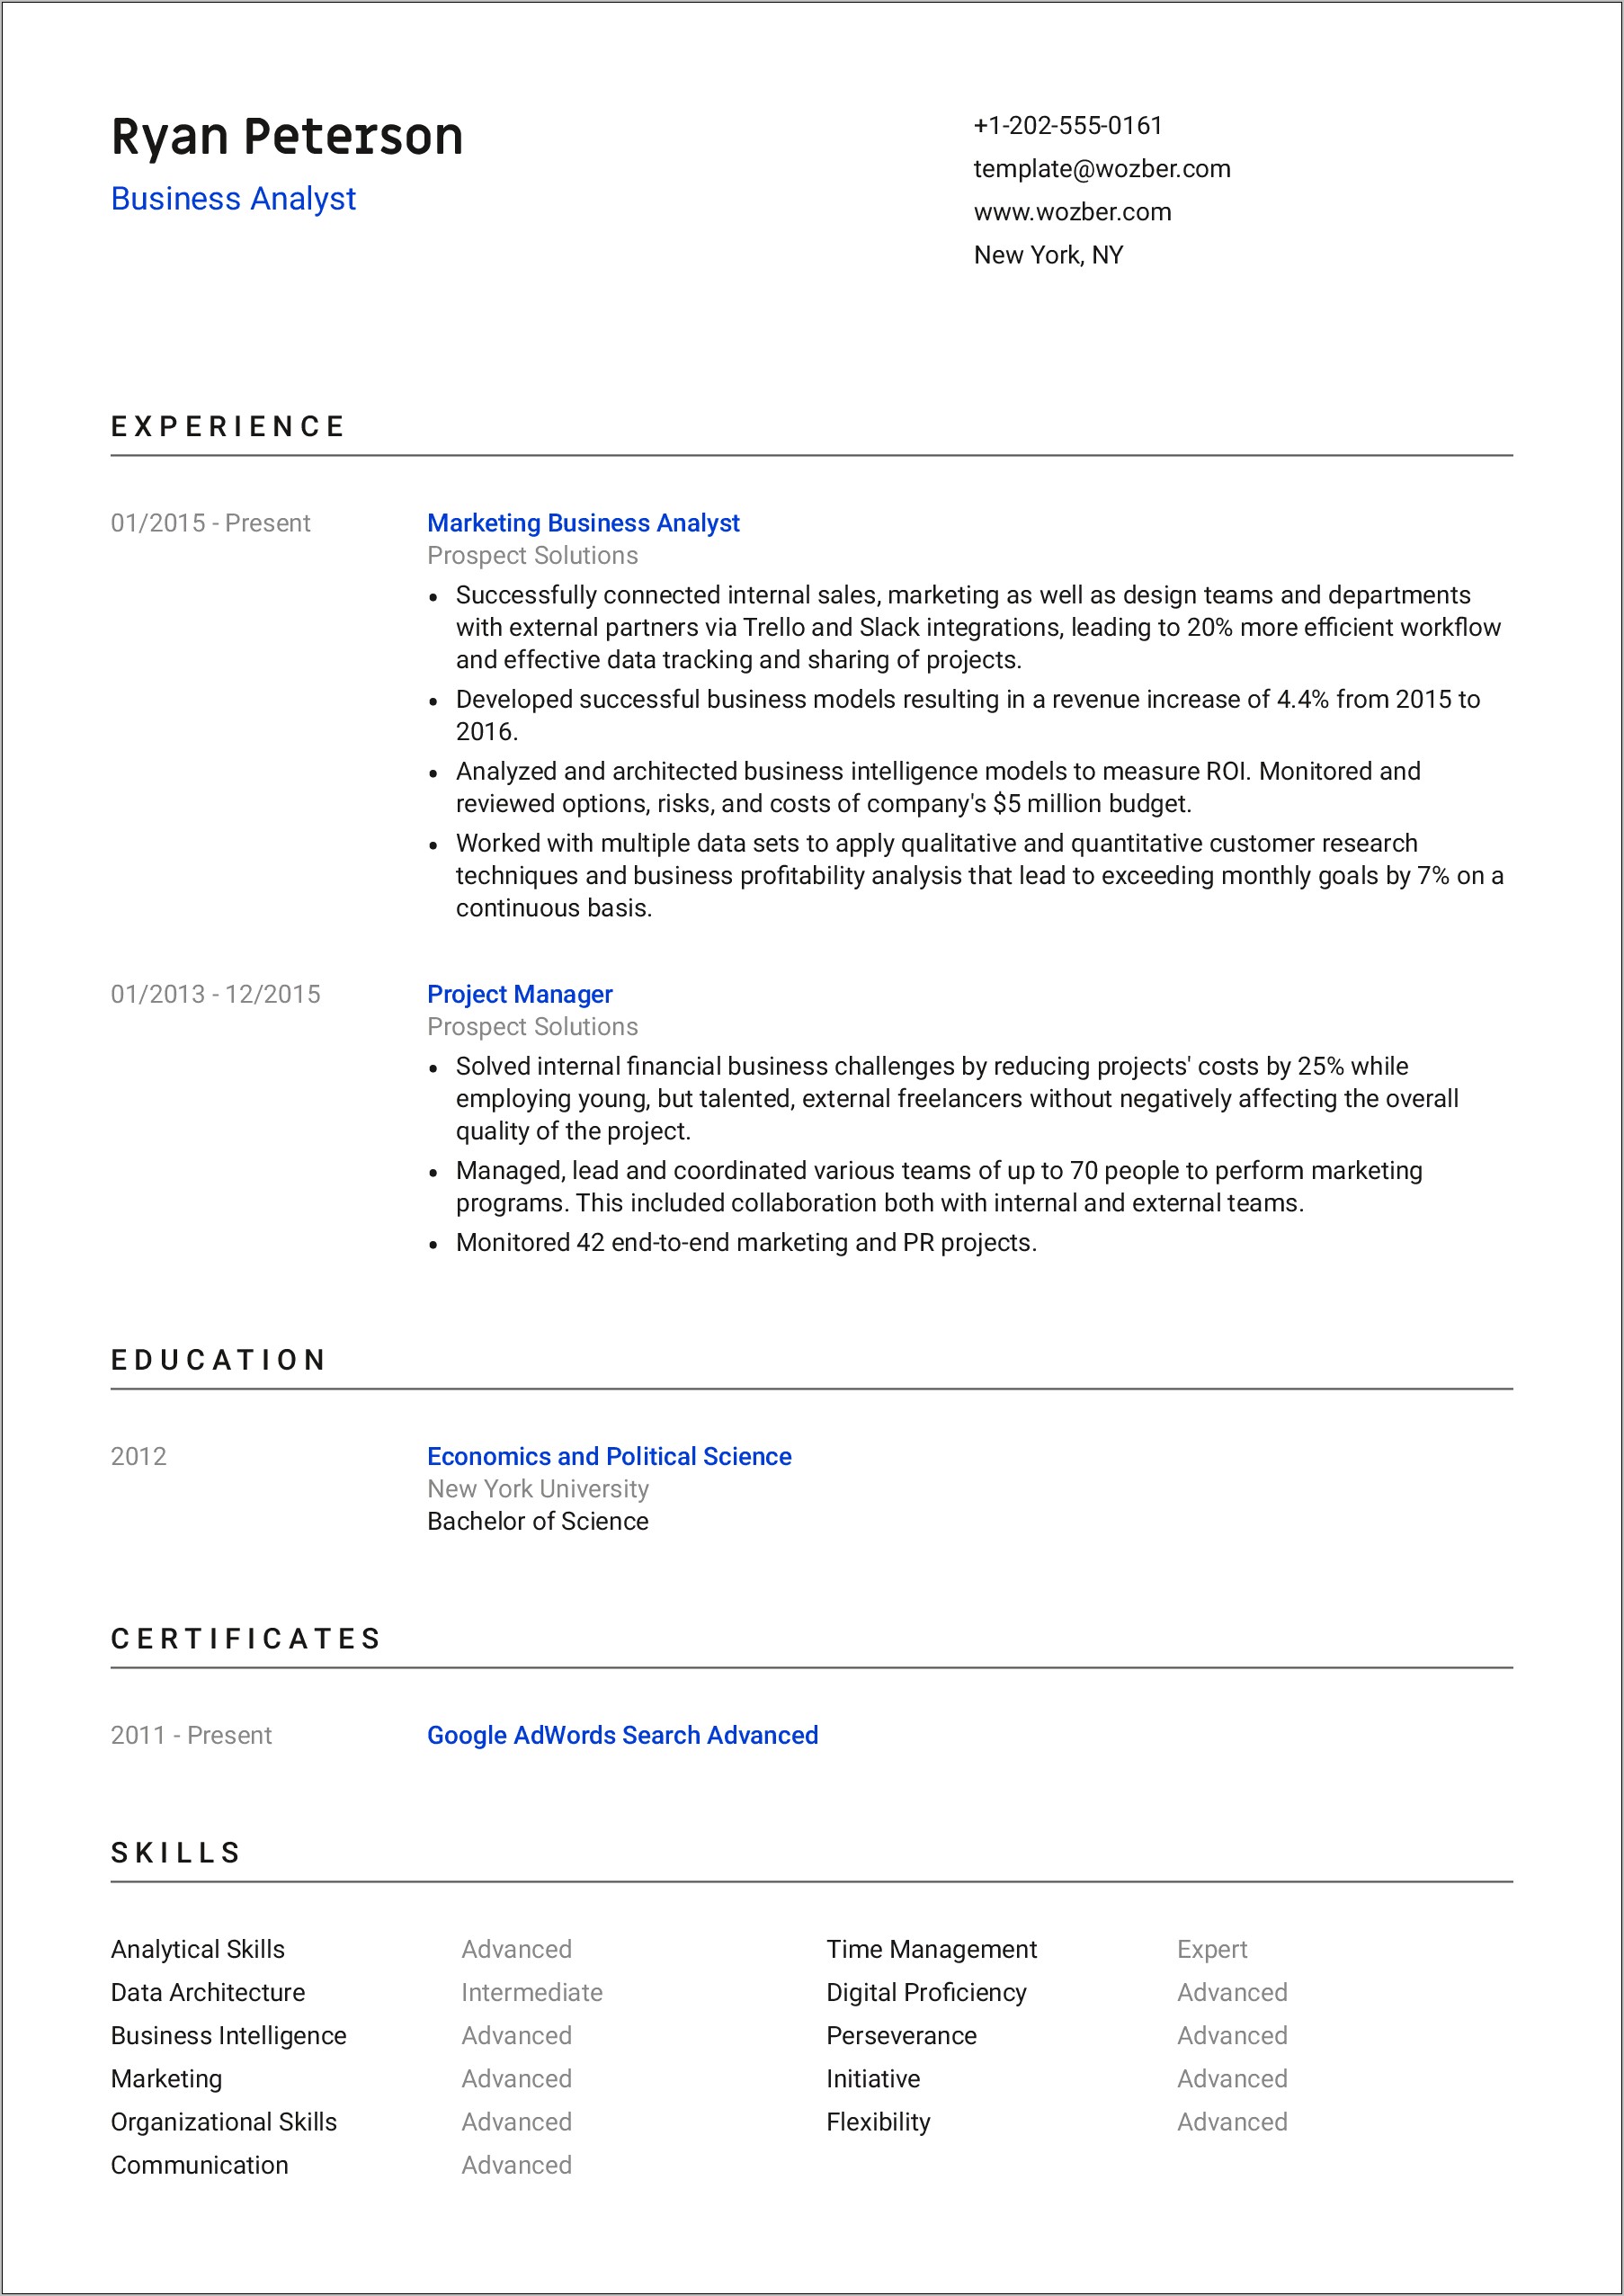 Resume Tracking System Free Download